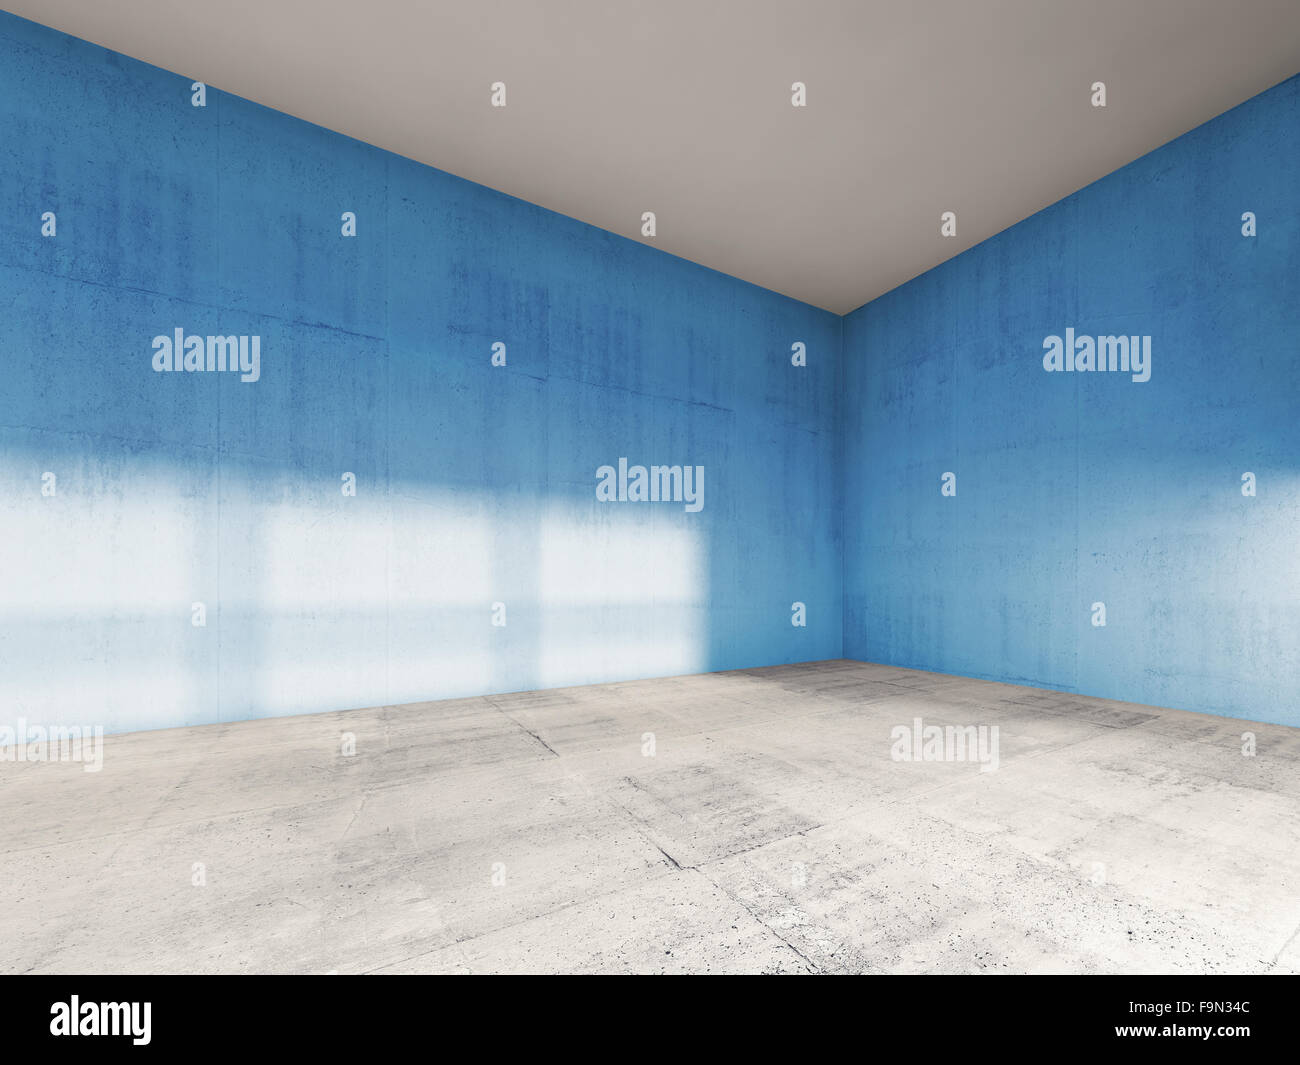 Abstract modern interior, empty room with blue concrete walls. 3d render illustration Stock Photo